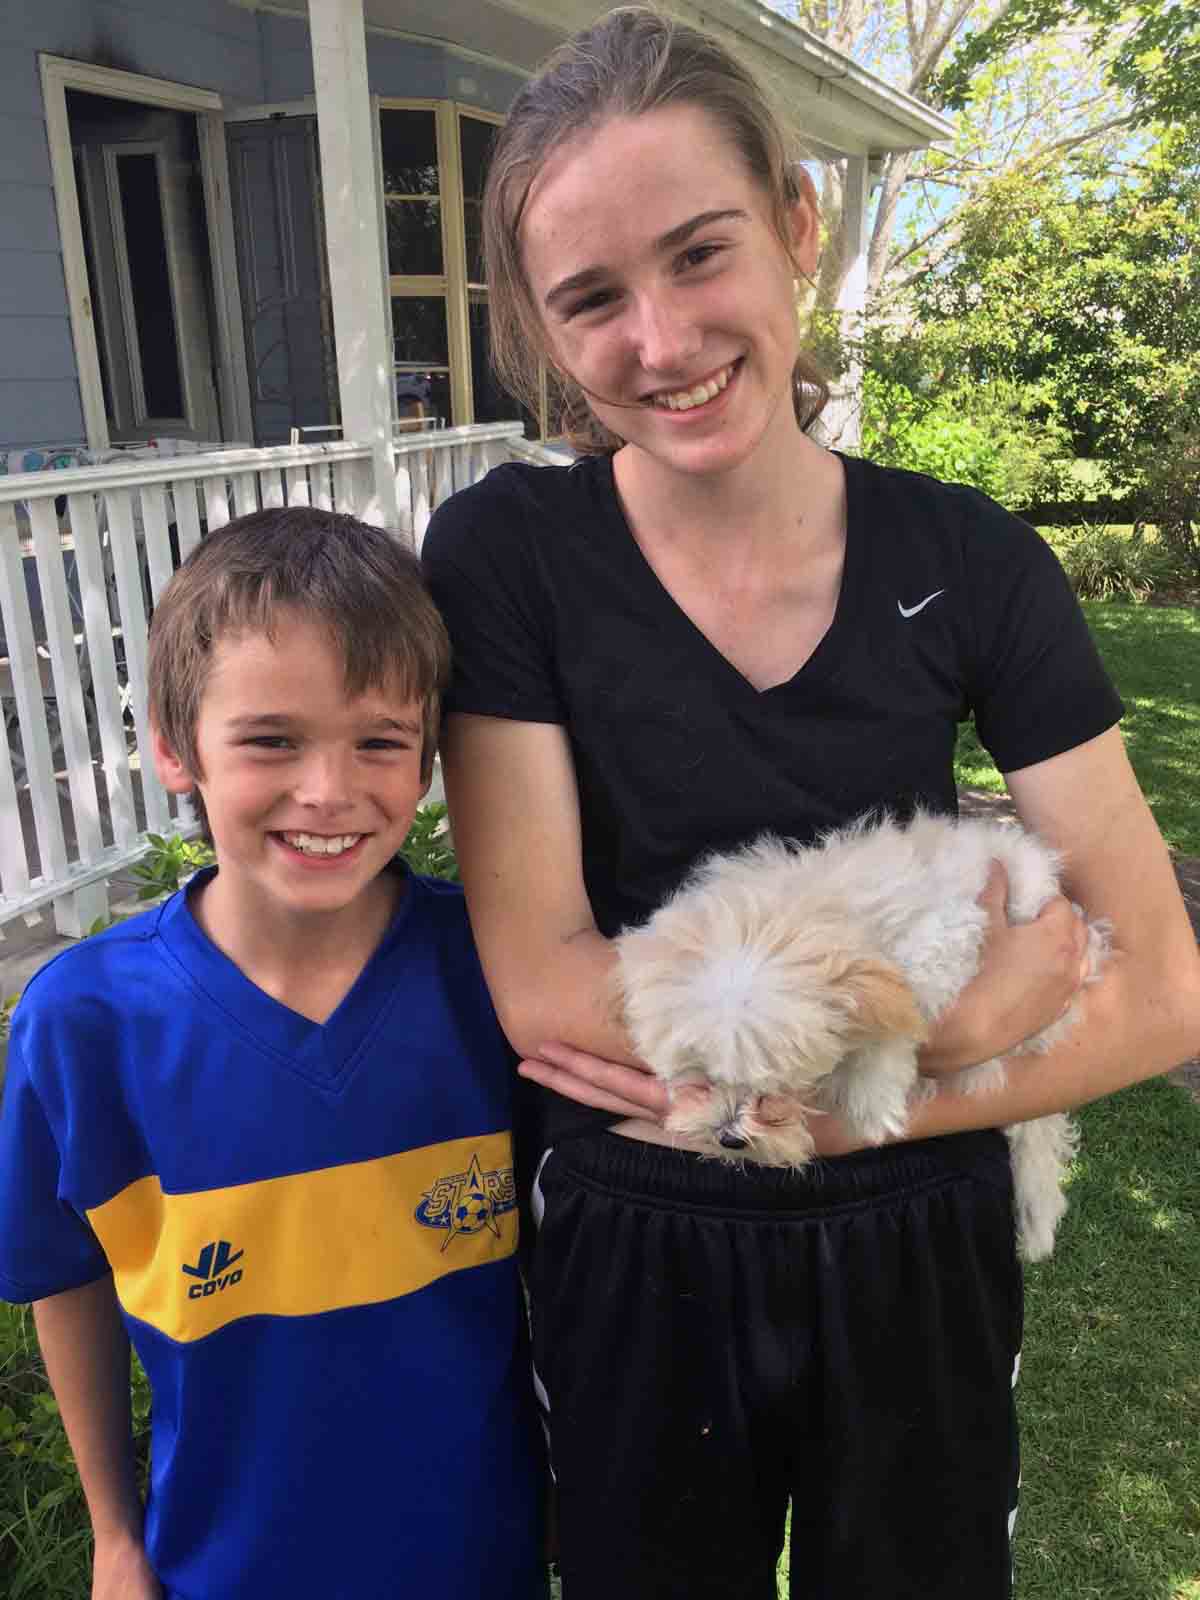 Lara Hawkins, 14, holding Milly after the fire as her brother, Jack, stands beside her. (Photo courtesy of the Hawkins family)